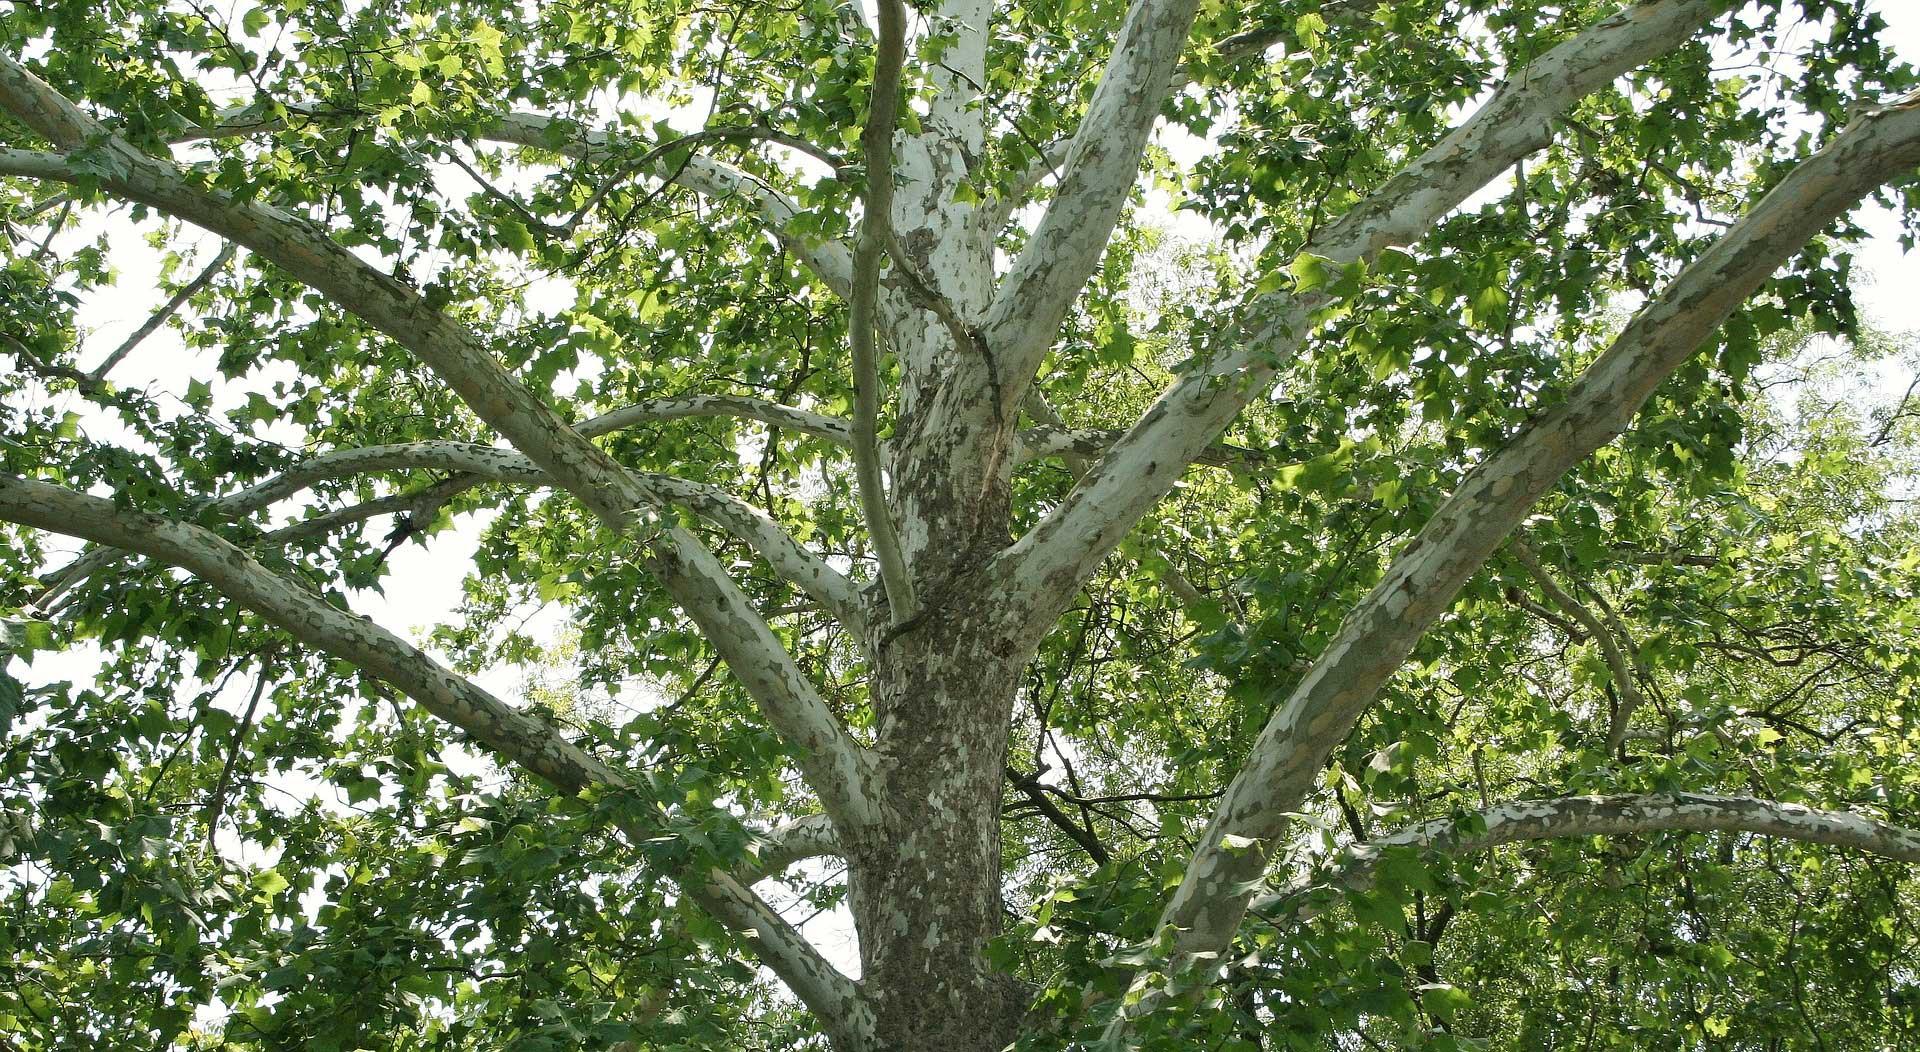 sycamore branching structure